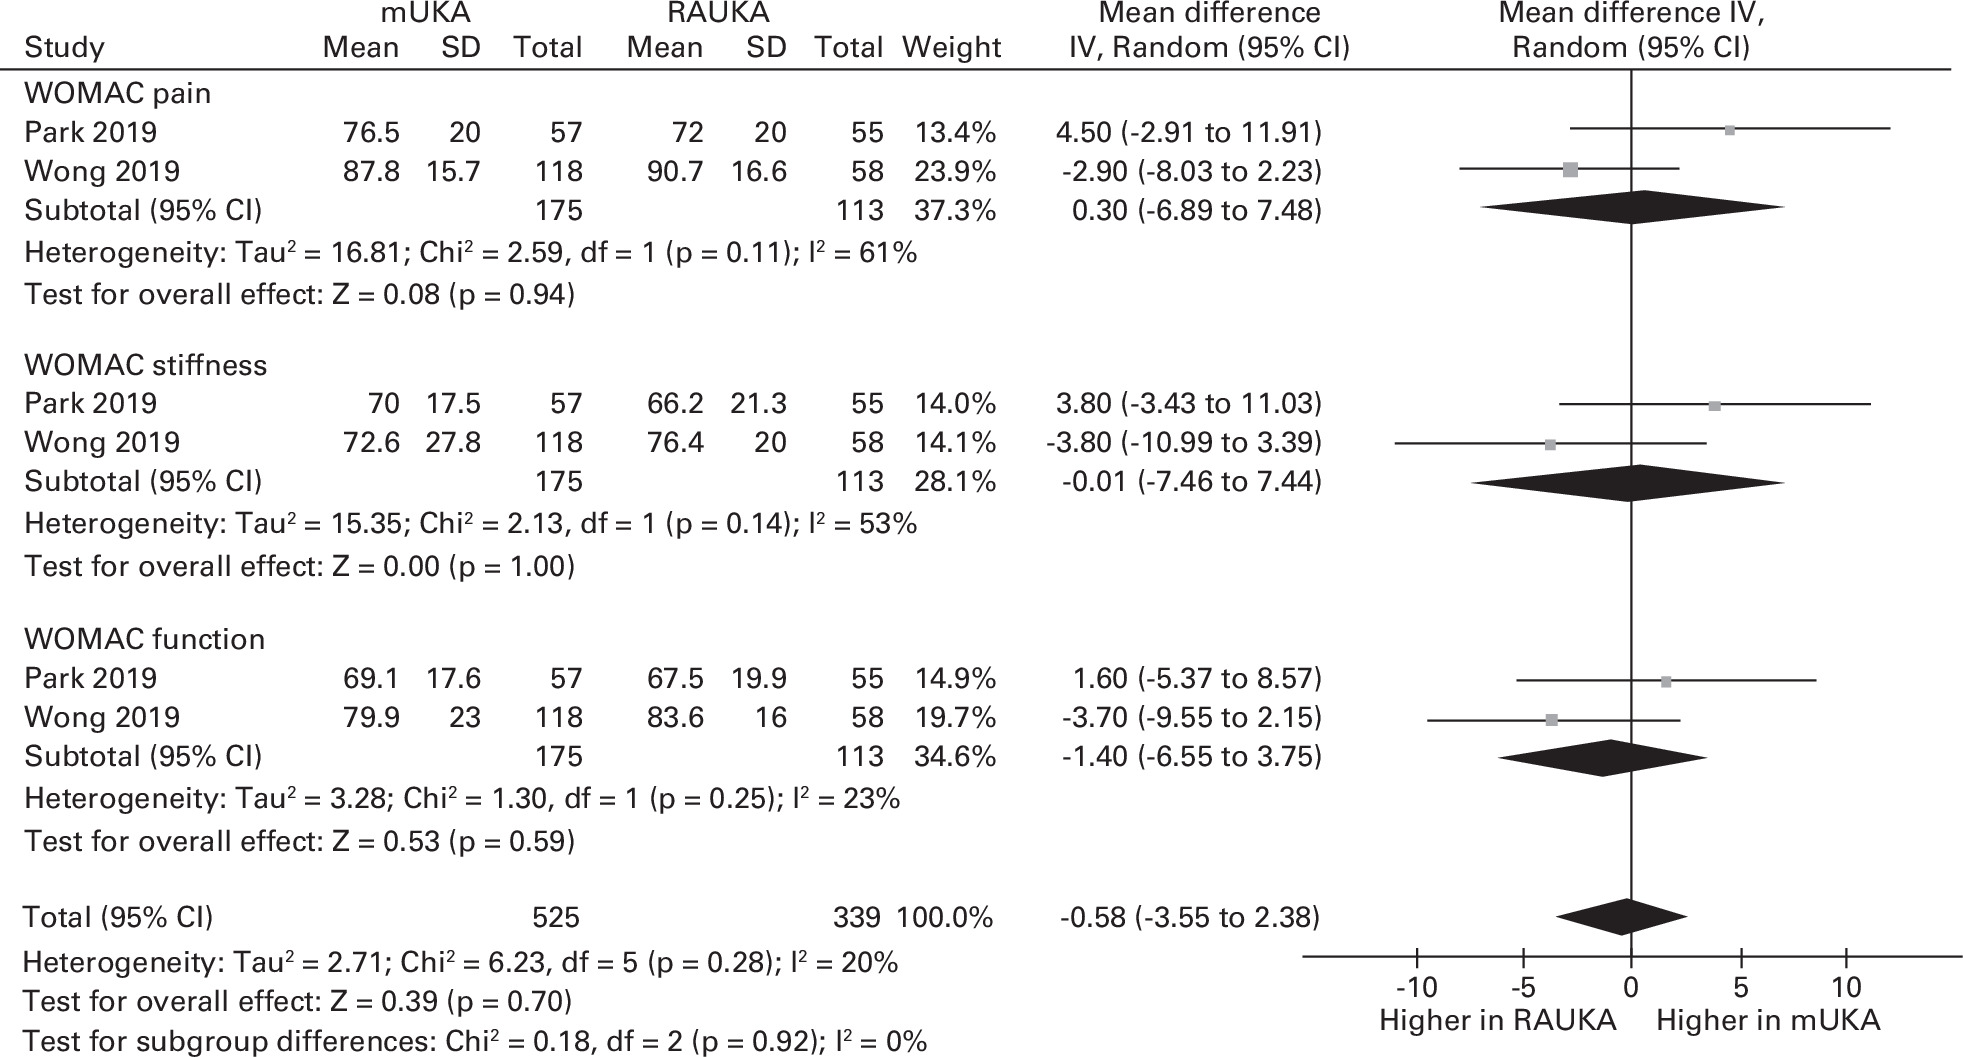 Fig. 5 
            Forest plot of pooled Western Ontario and McMaster Universities Arthritis Index (WOMAC) scores. CI, confidence interval; IV, inverse variance; mUKA, manual medial unicompartmental knee arthroplasty; RAUKA, robotic arm-assisted unicompartmental knee arthroplasty; RMSE, root mean square error; SD, standard deviation.
          